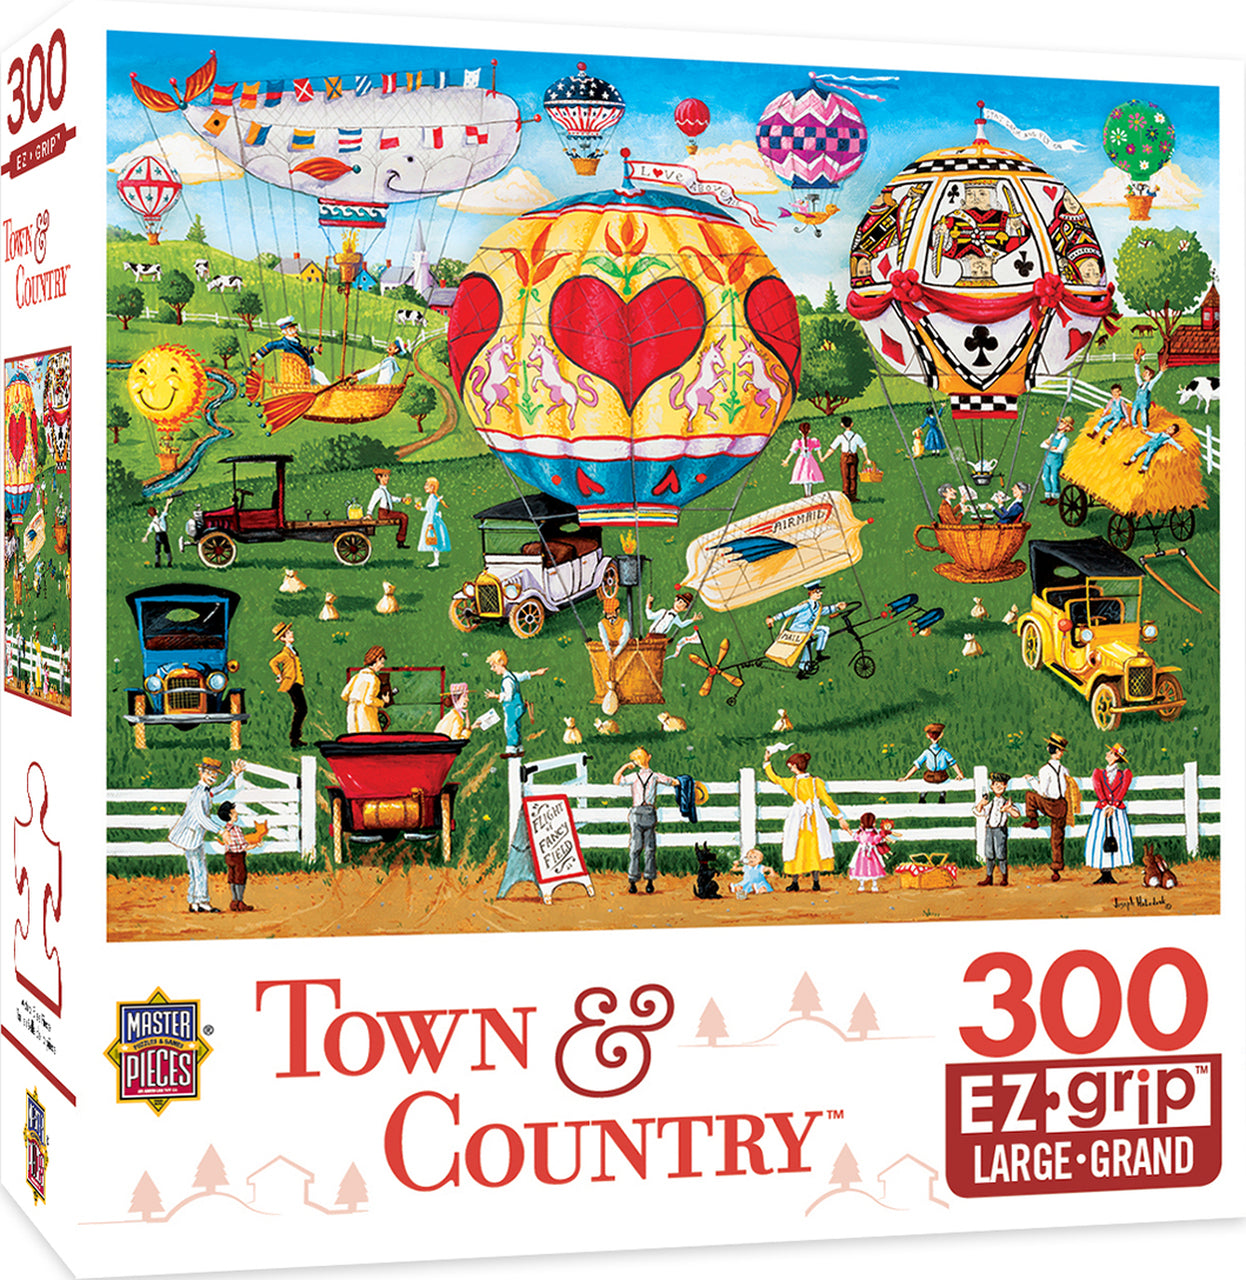 Town & Country Flights of Fancy - Large 300 Piece EZGrip Jigsaw Puzzle by Masterpieces